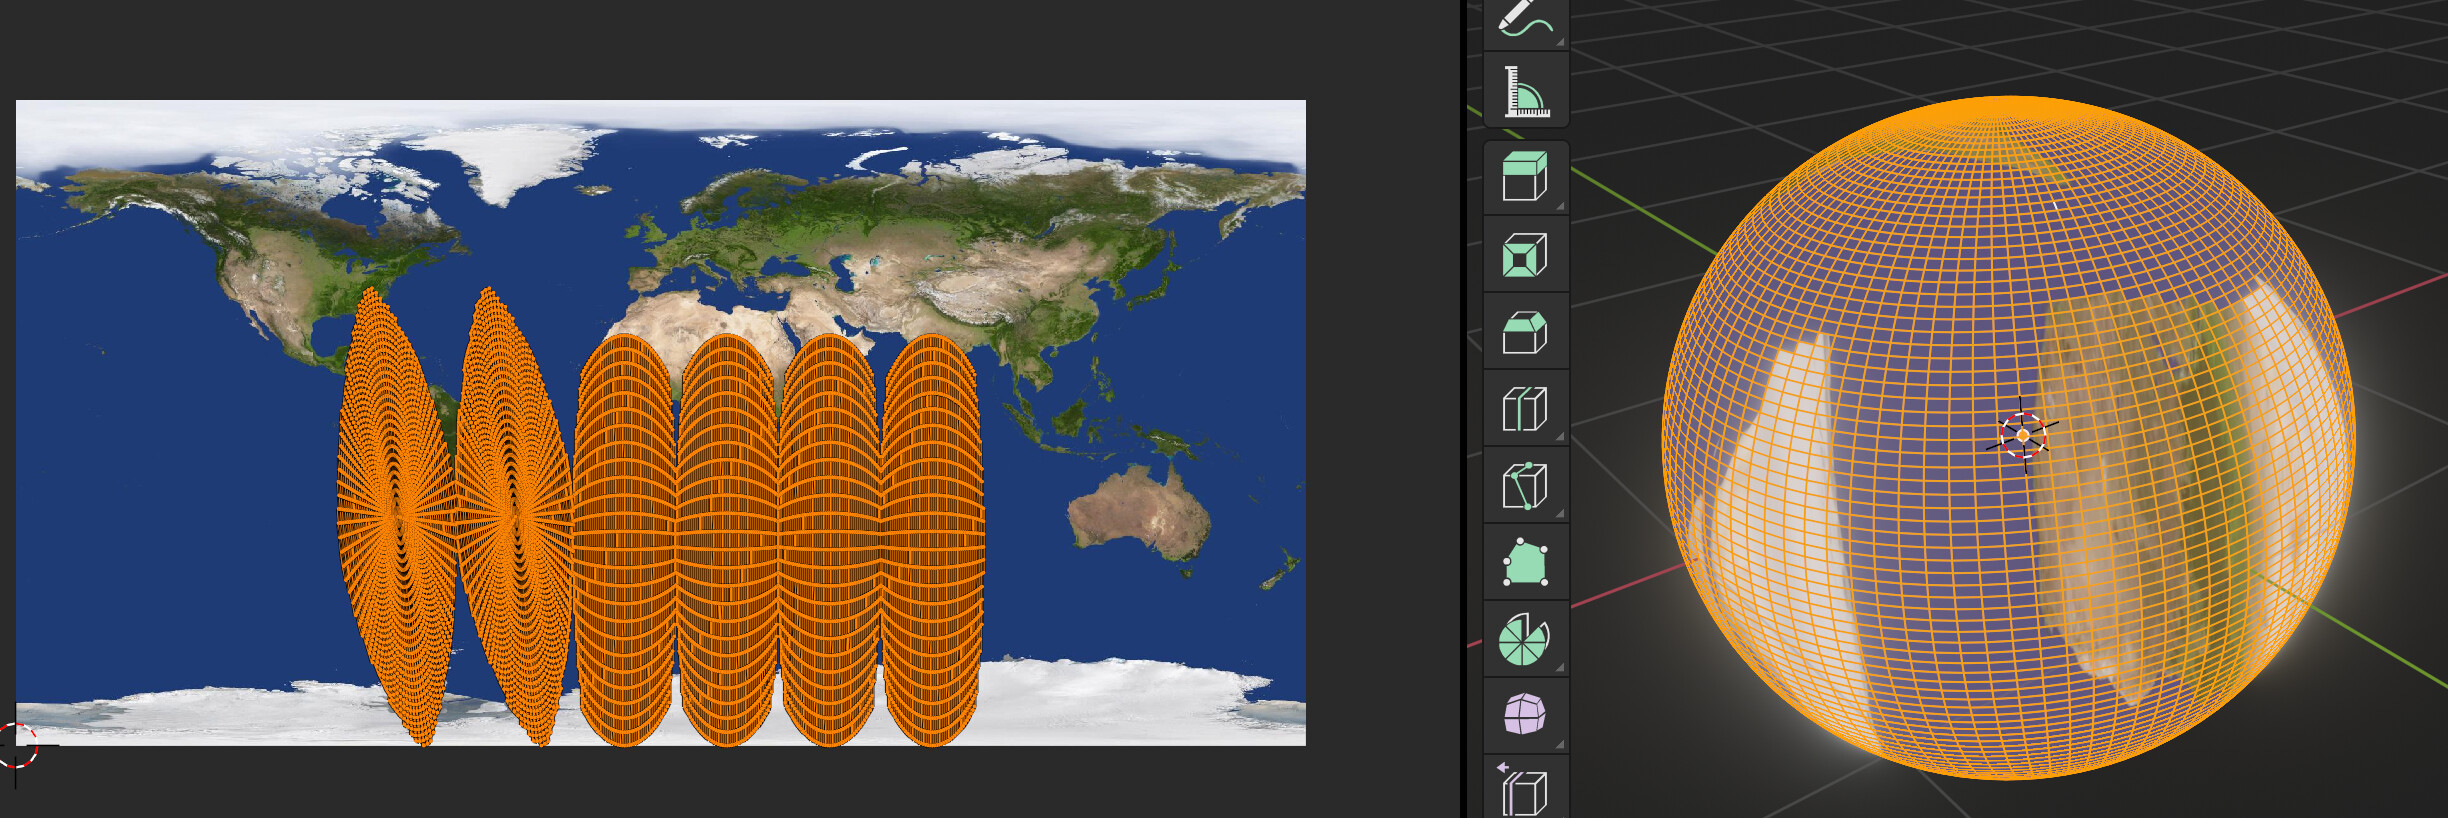 to map rectangular earth on a sphere? - Materials and Textures - Blender Community